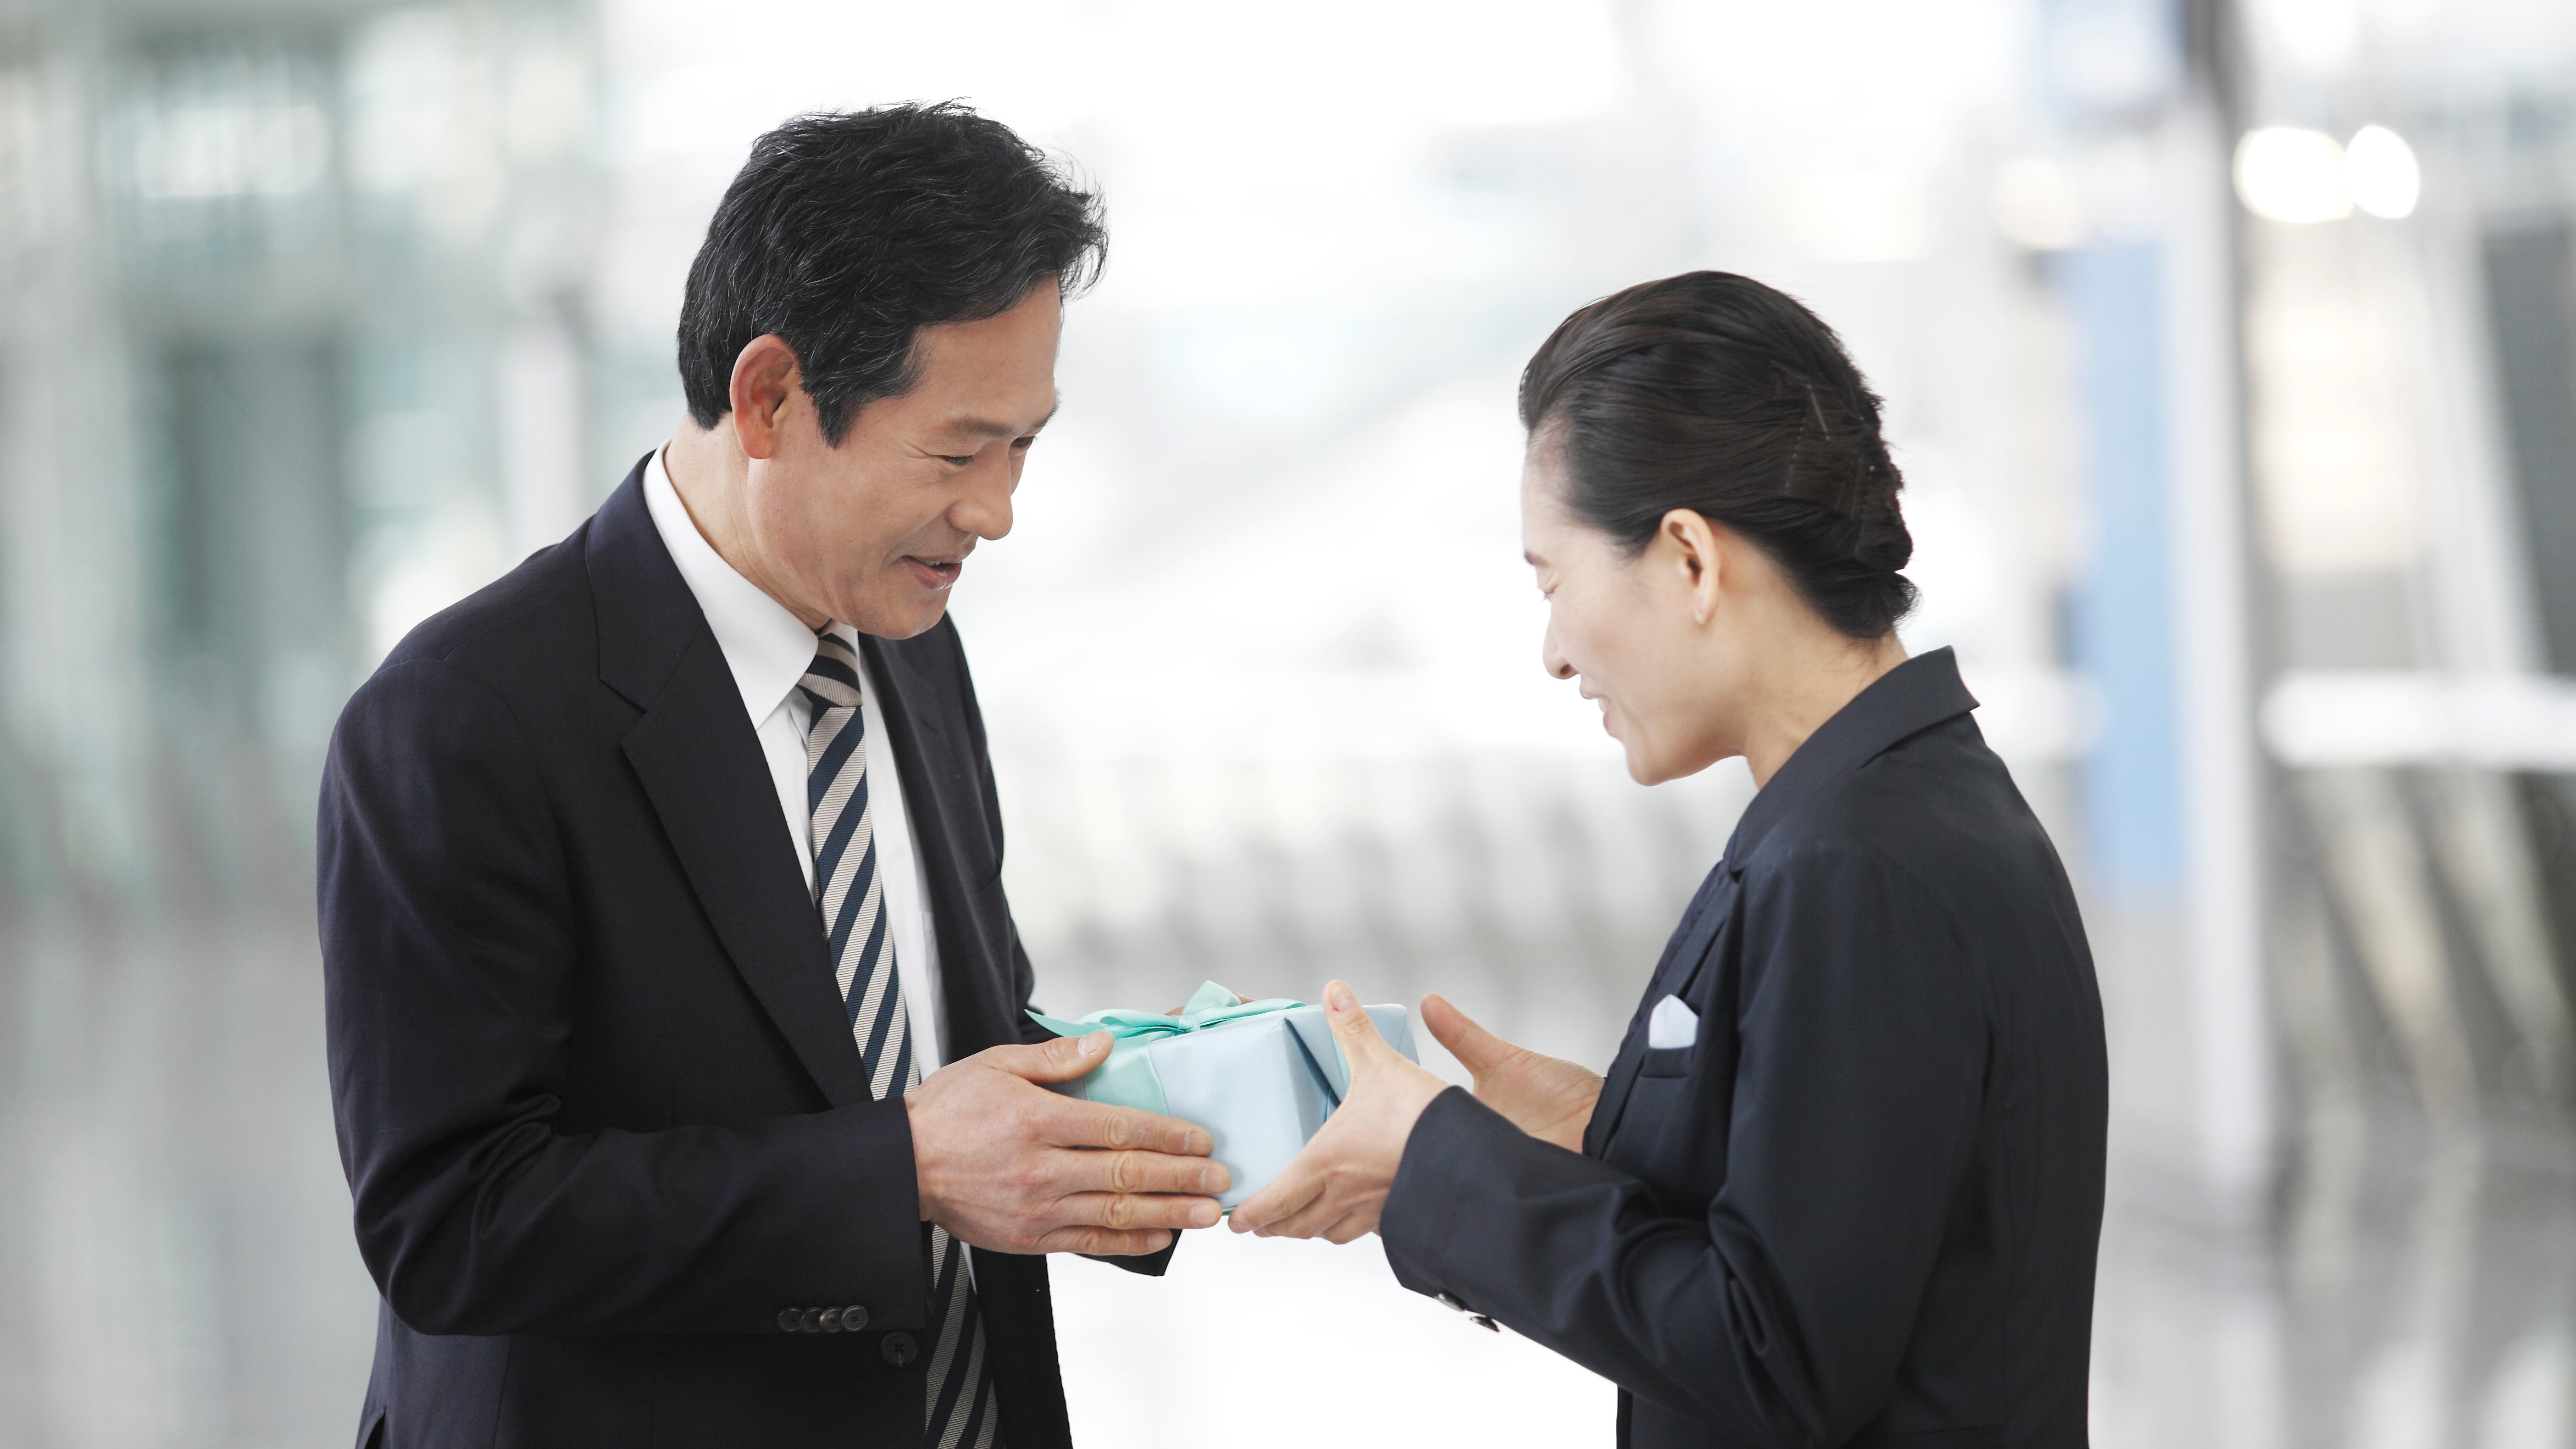 Business man giving business woman a gift